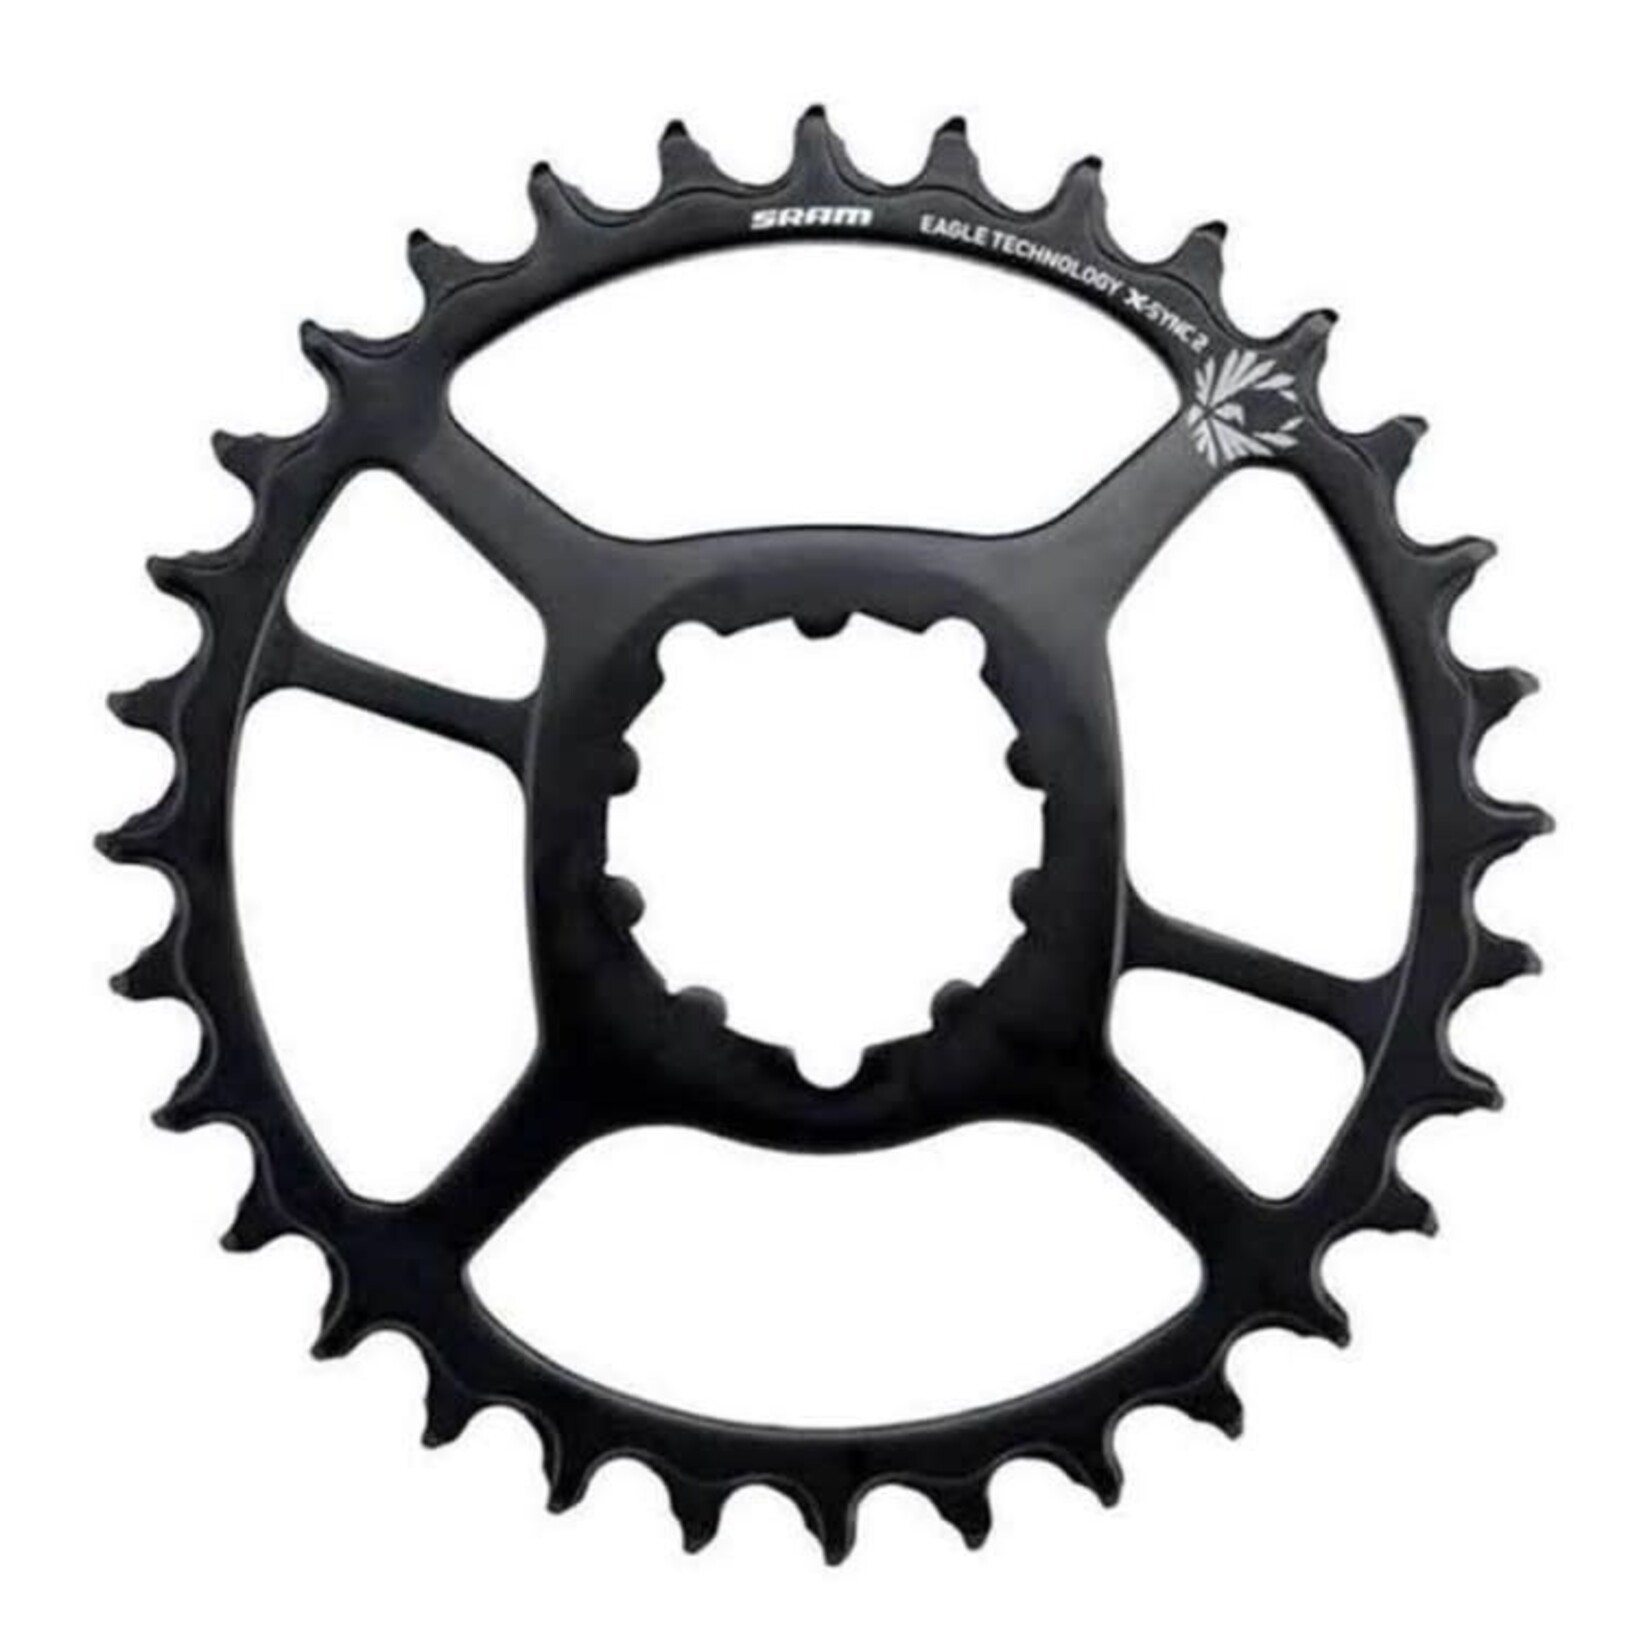 SRAM Eagle X-Synx 2 32T Direct Mount Chainring